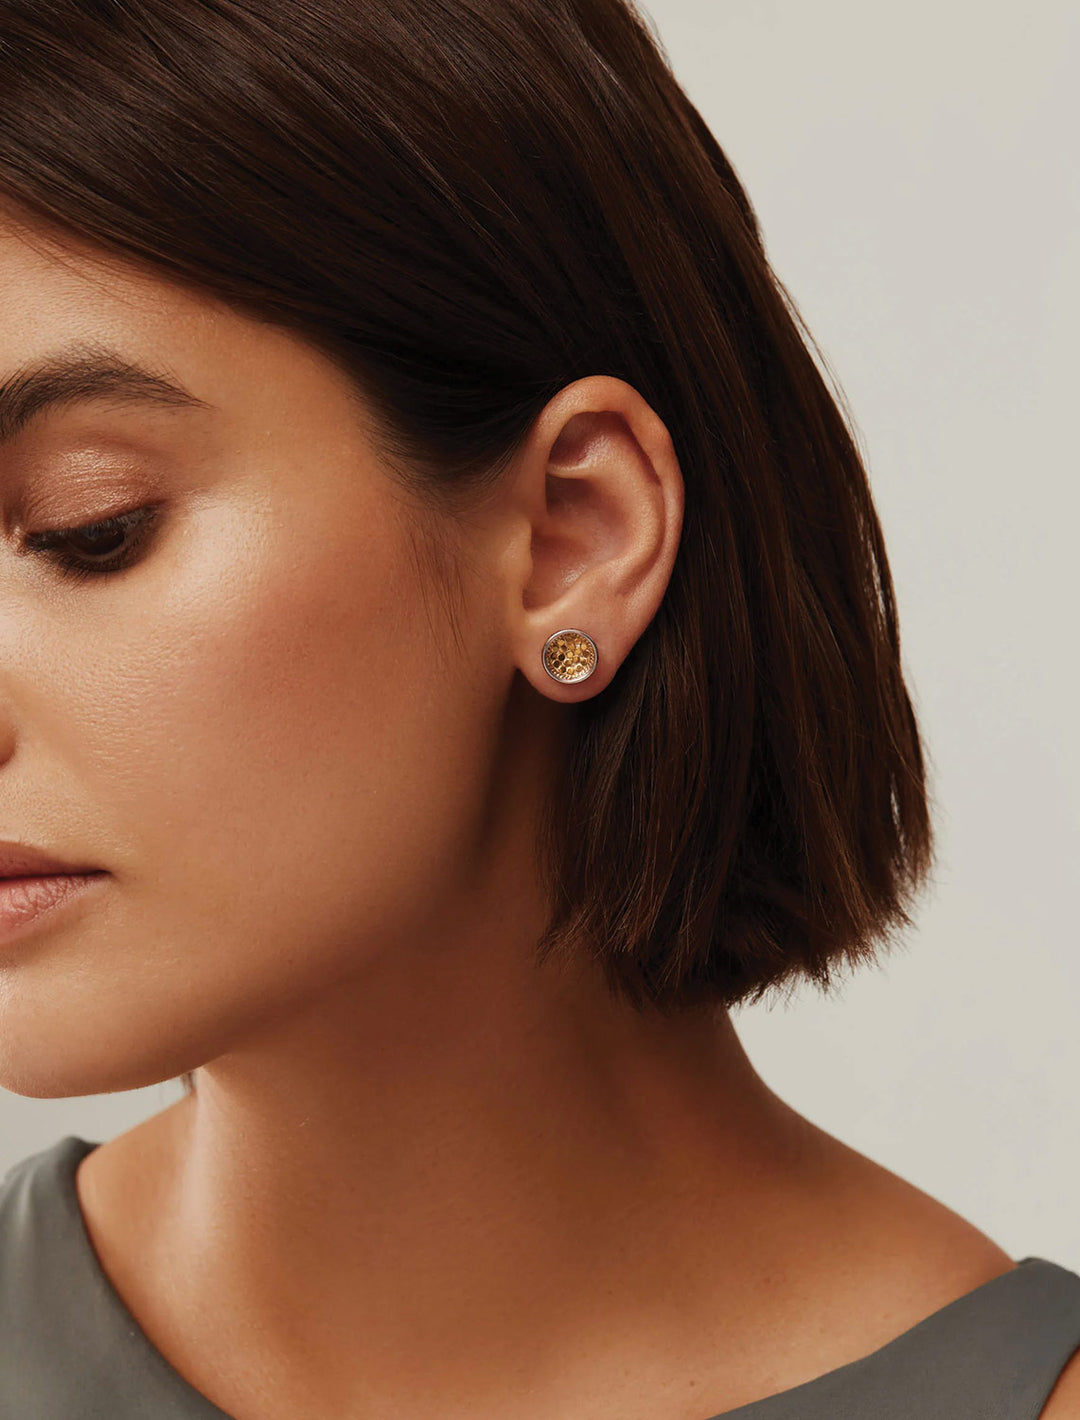 Model wearing Anna Beck's gili silver and gold dish earrings.